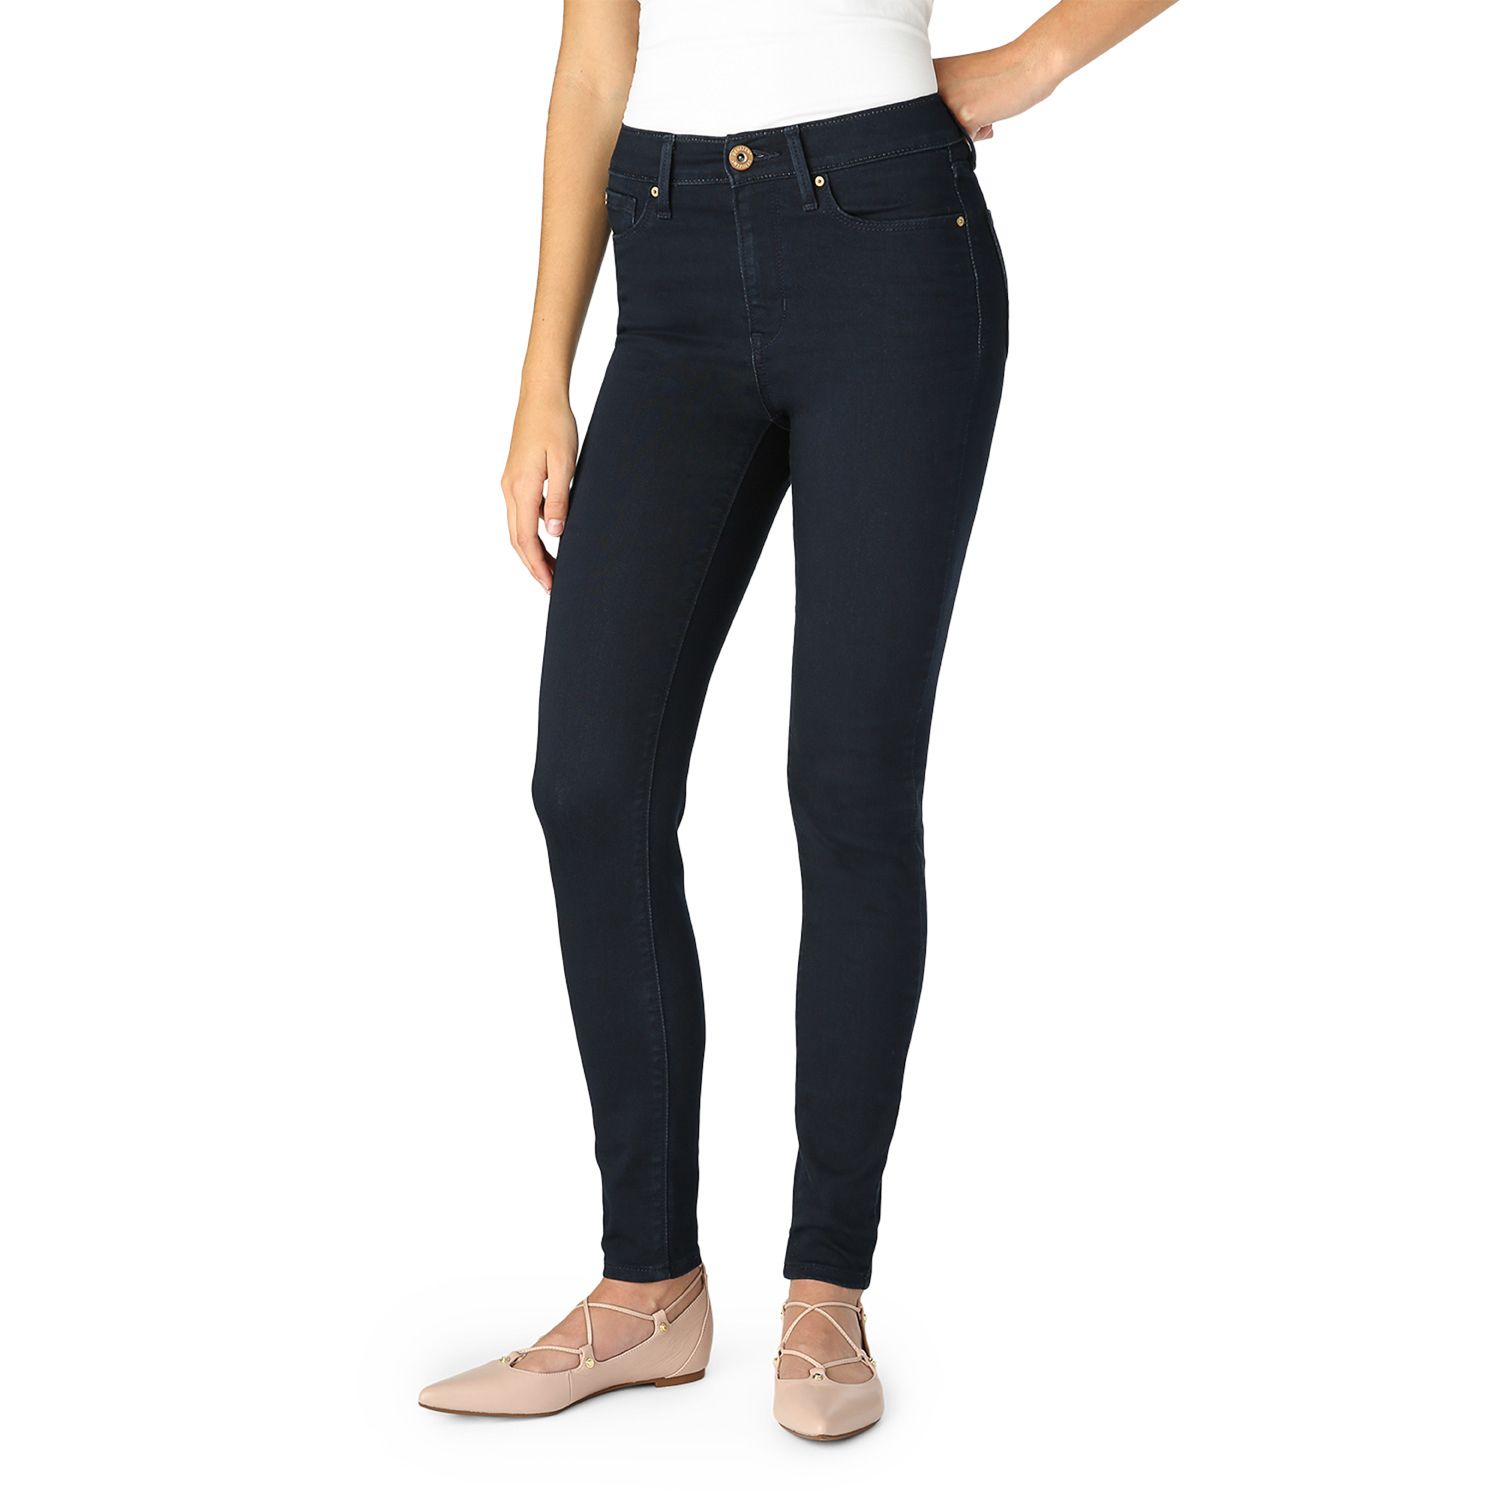 High-Waisted Jegging Jeans